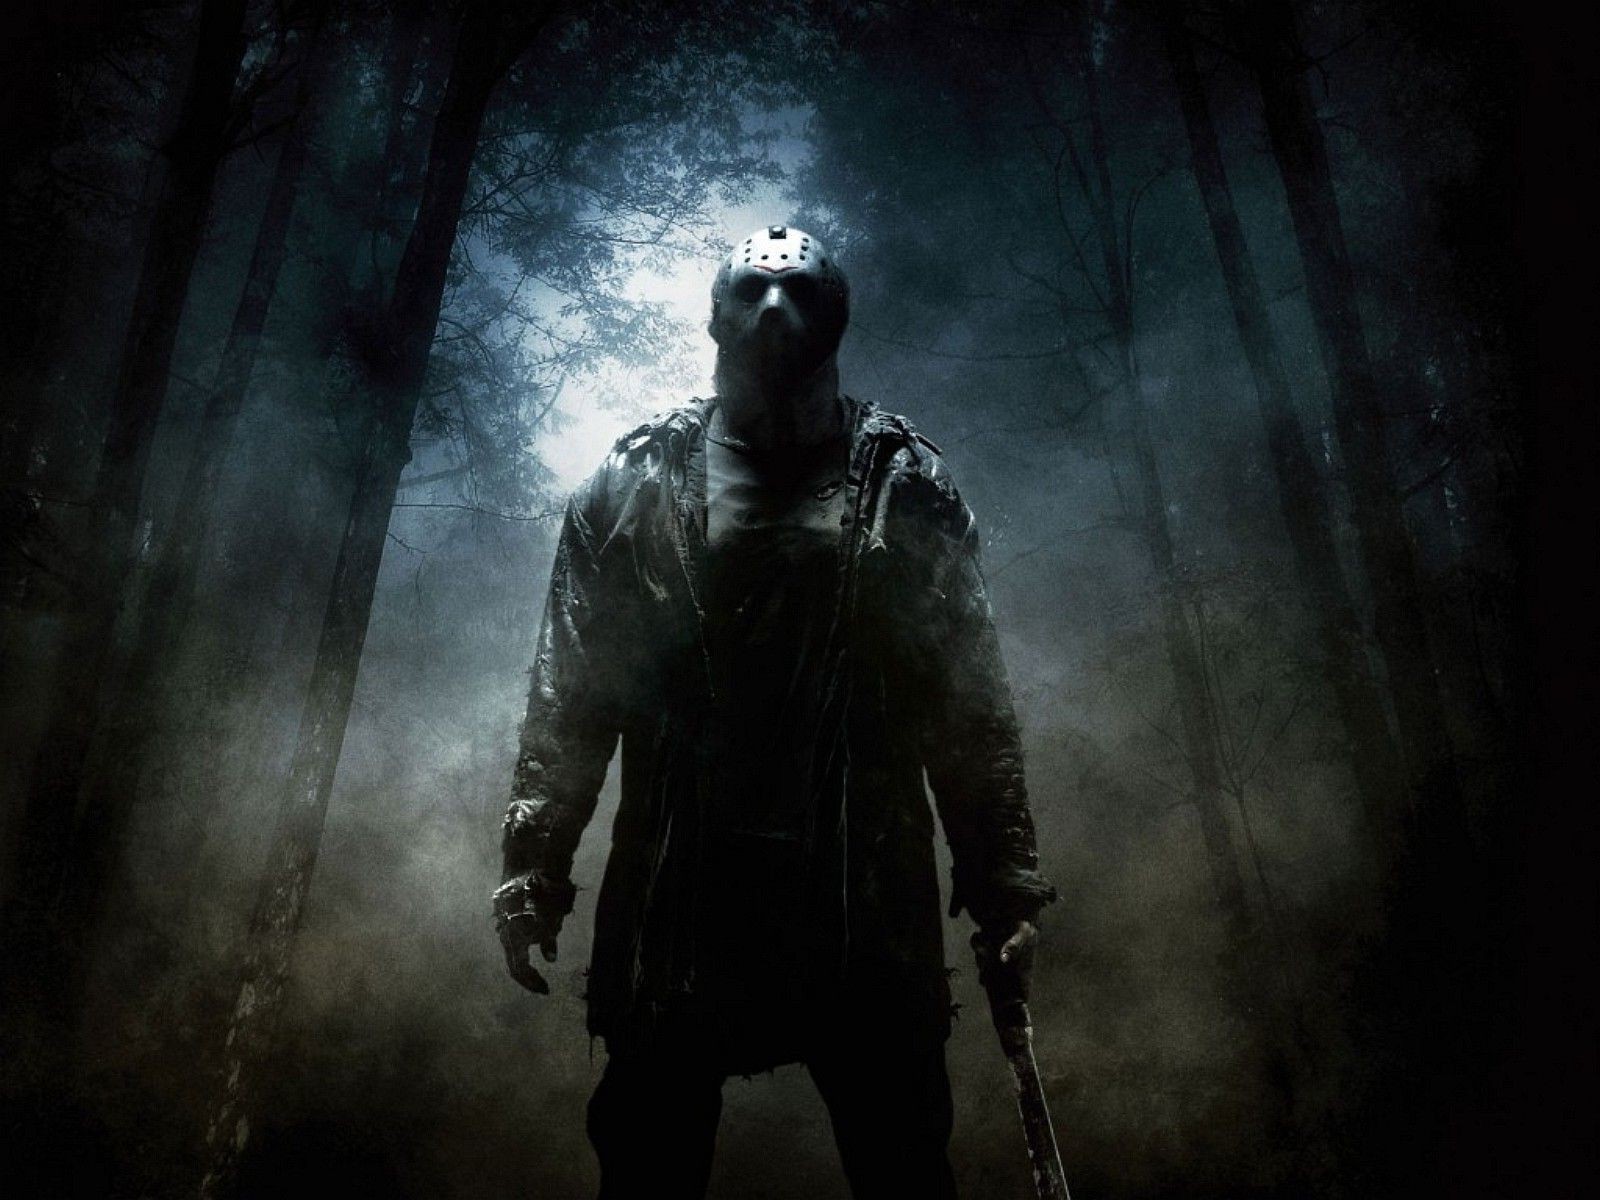 https://bloody-disgusting.com/wp-content/uploads/2017/05/157600-Friday_the_13th-movies-Jason_Voorhees.jpg